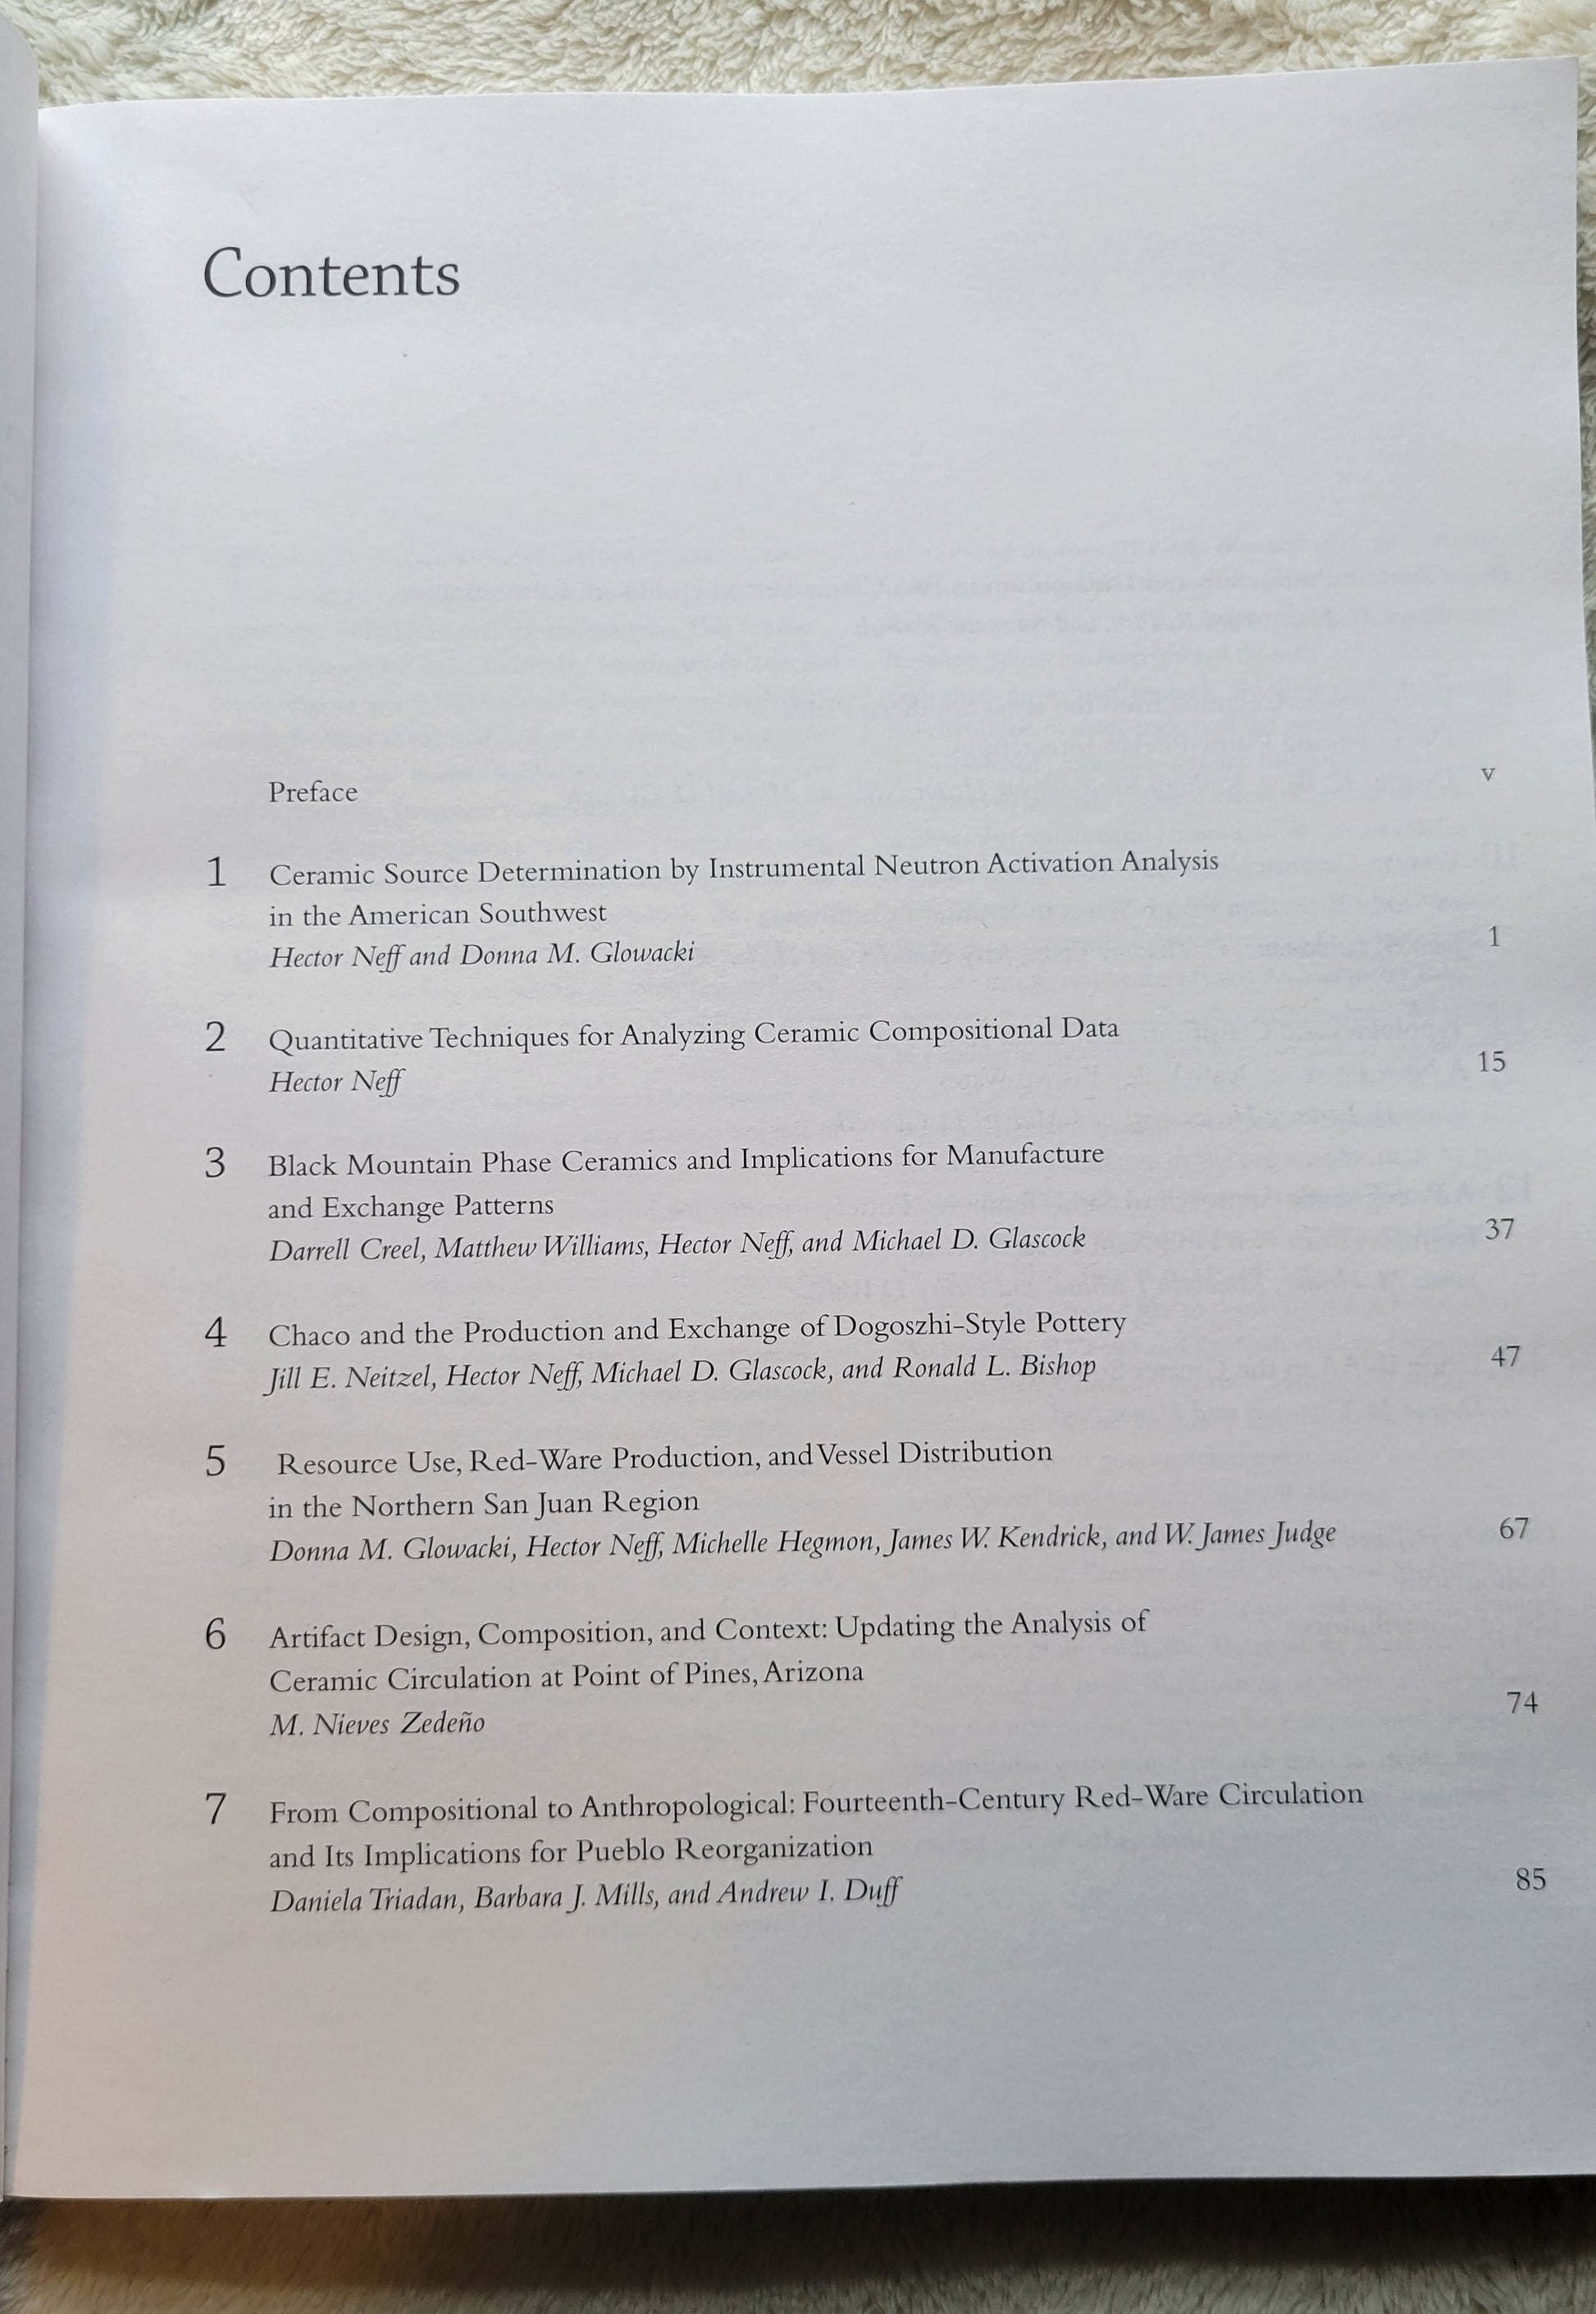 Used book.  "Ceramic Production and Circulation in the Greater Southwest: Source Determination by INAA and Complementary Mineralogical Investigations" edited by Dr. Donna M. Glowacki and Dr.Hector Neff, published by the Cotsen Institute of Archaeology at UCLA, 2002.  View of table of contents.